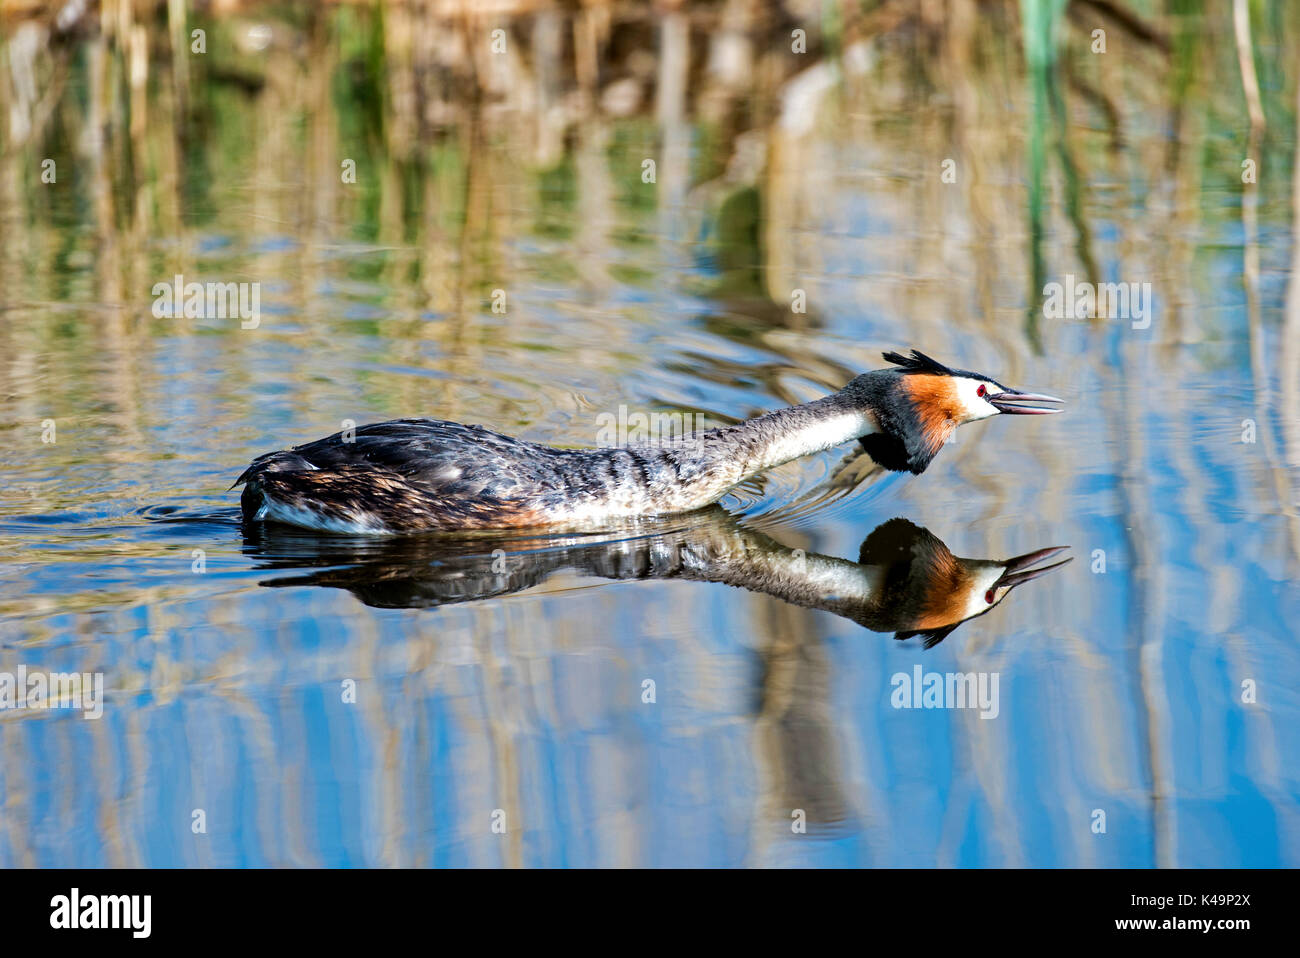 A Male Crested Grebe In Attack Position Stock Photo